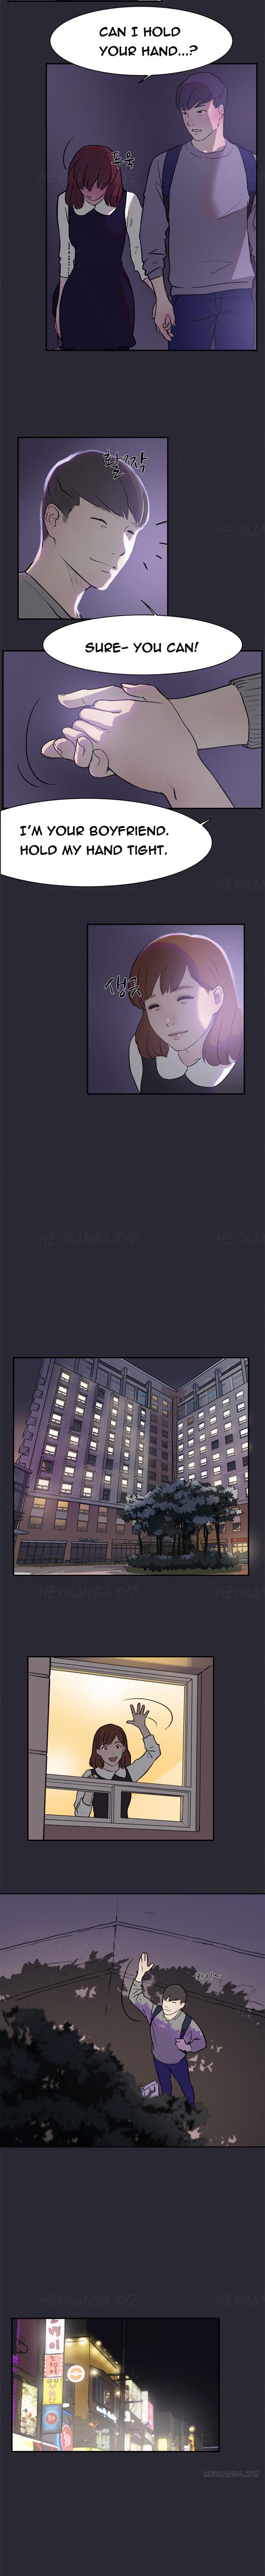 Glasses Double Date Ch.1-16 Blowjobs - Page 4